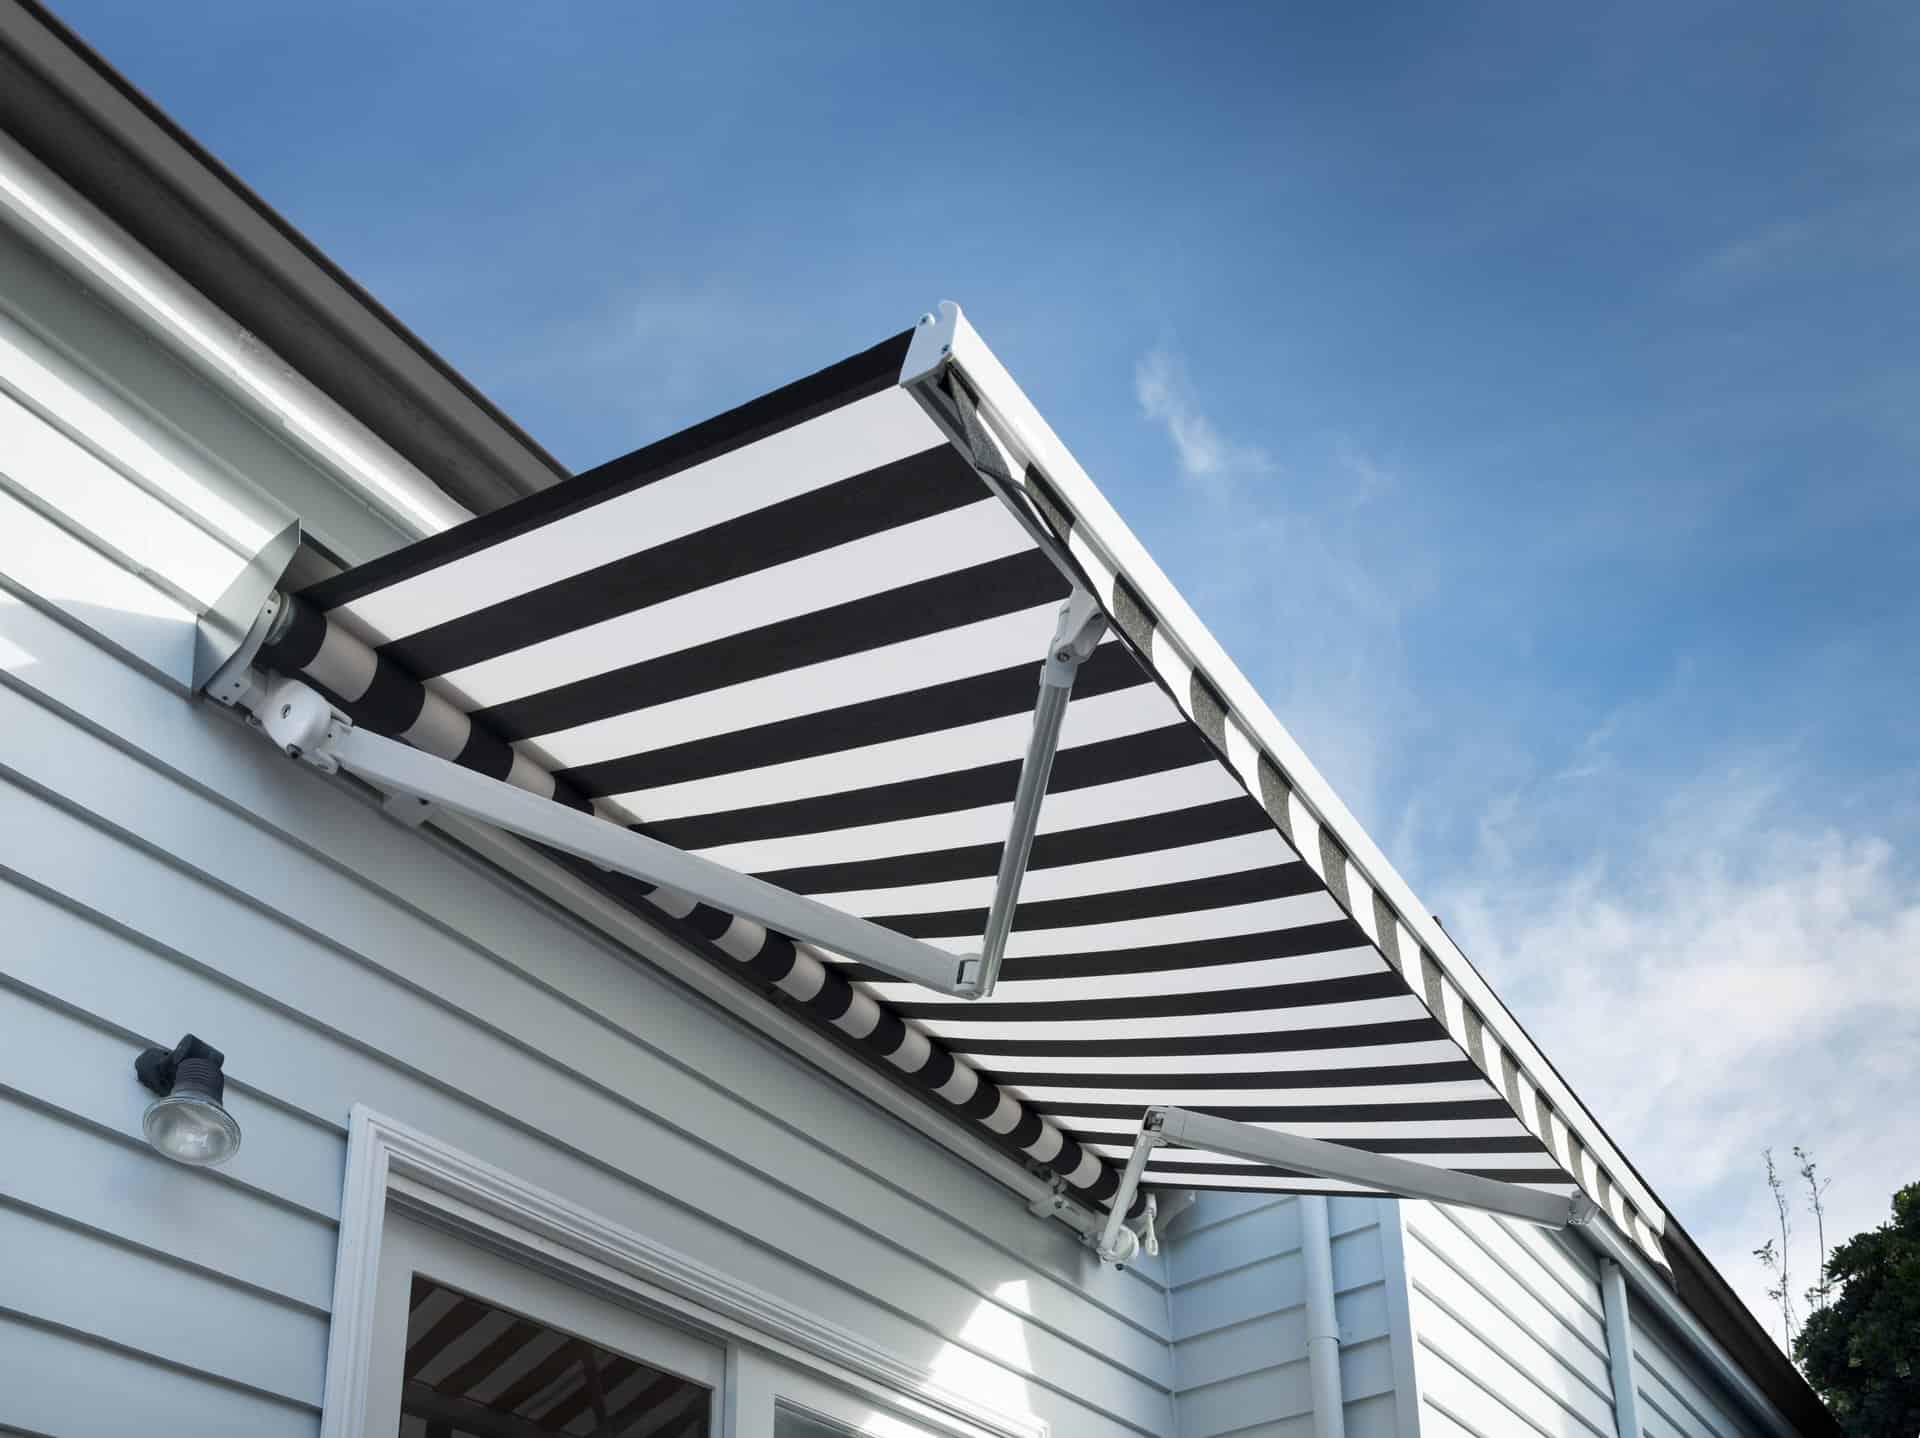 siena folding arm awnings installed